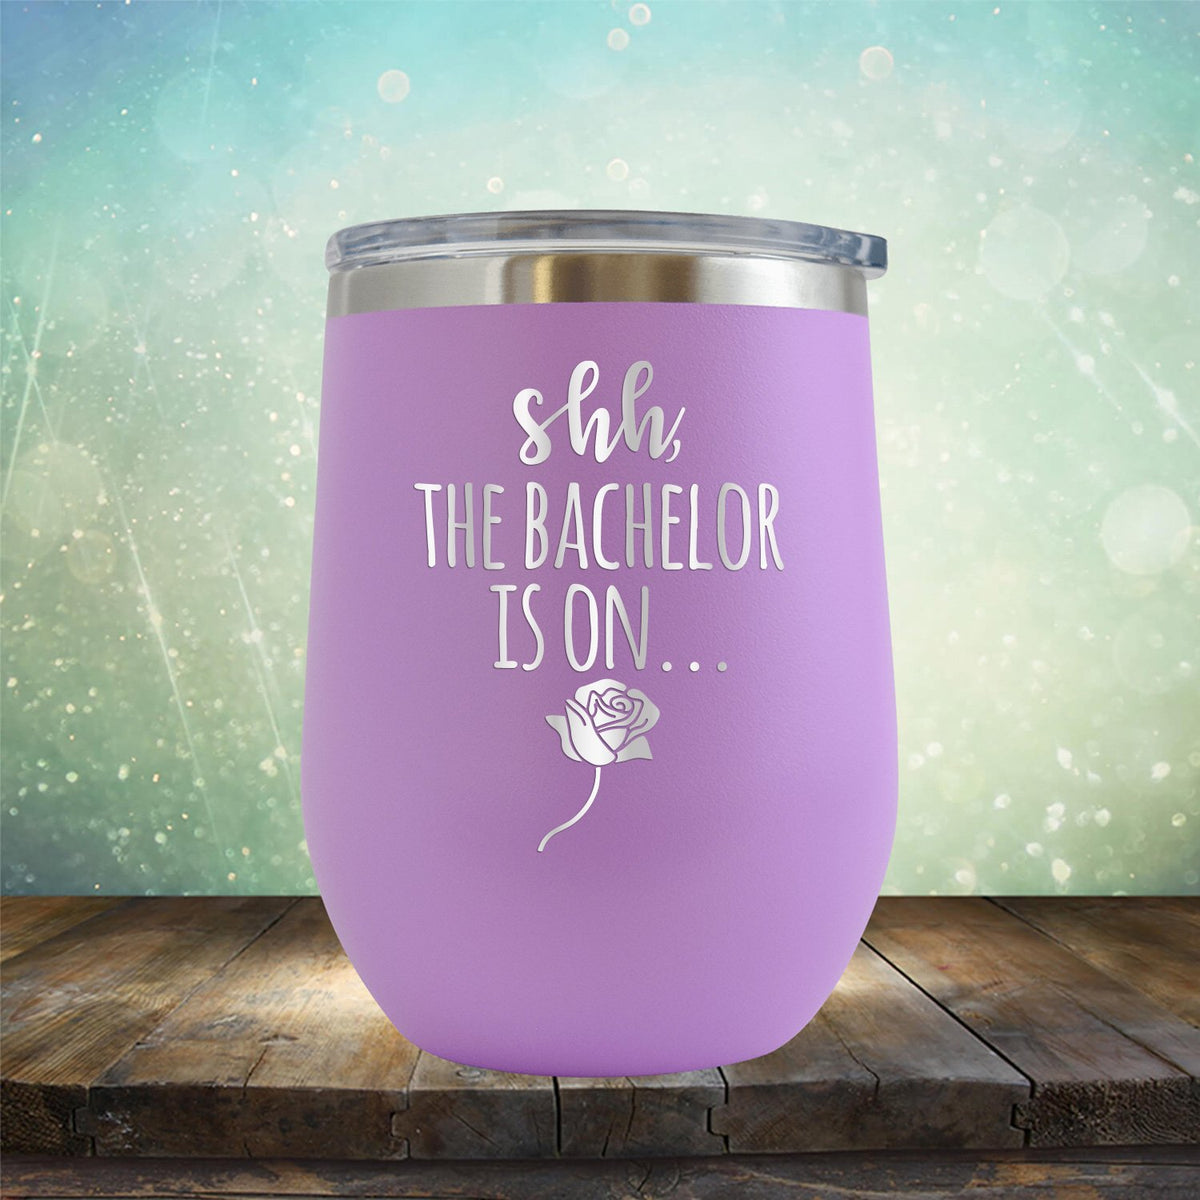 Shh... The Bachelor is On - Stemless Wine Cup